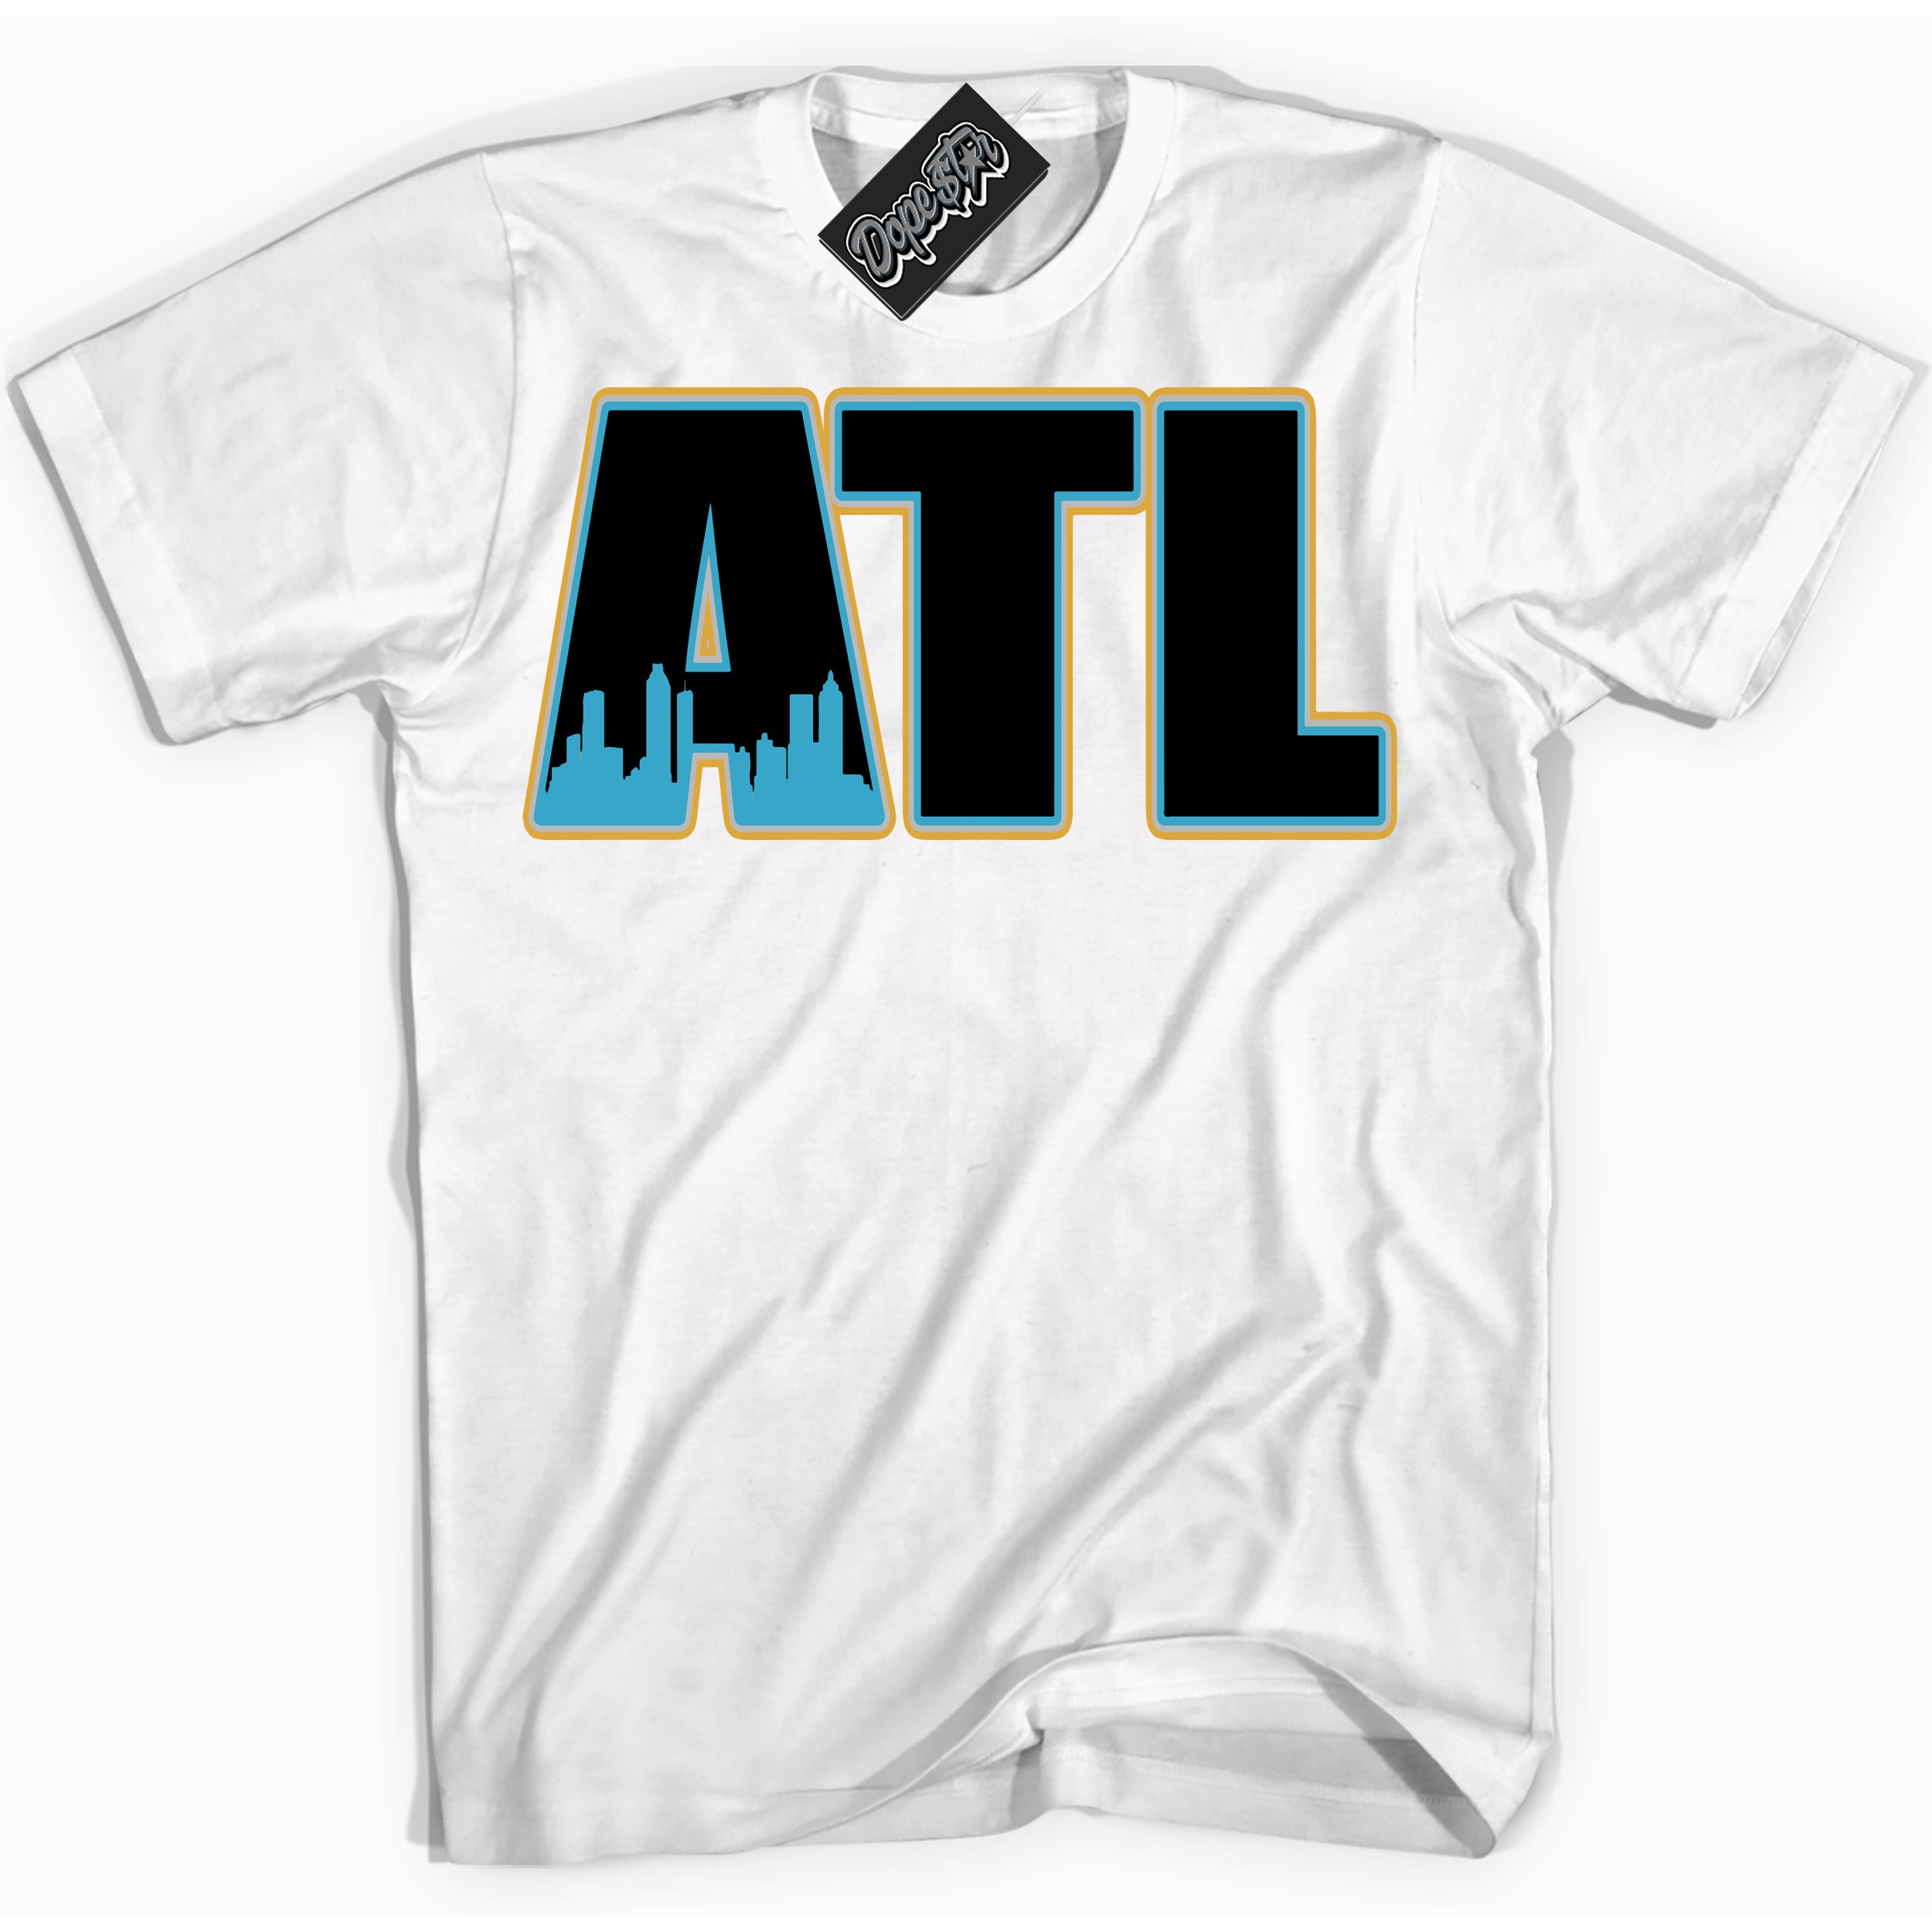 Cool White Shirt with “ Atlanta” design that perfectly matches Aqua 5s Sneakers.